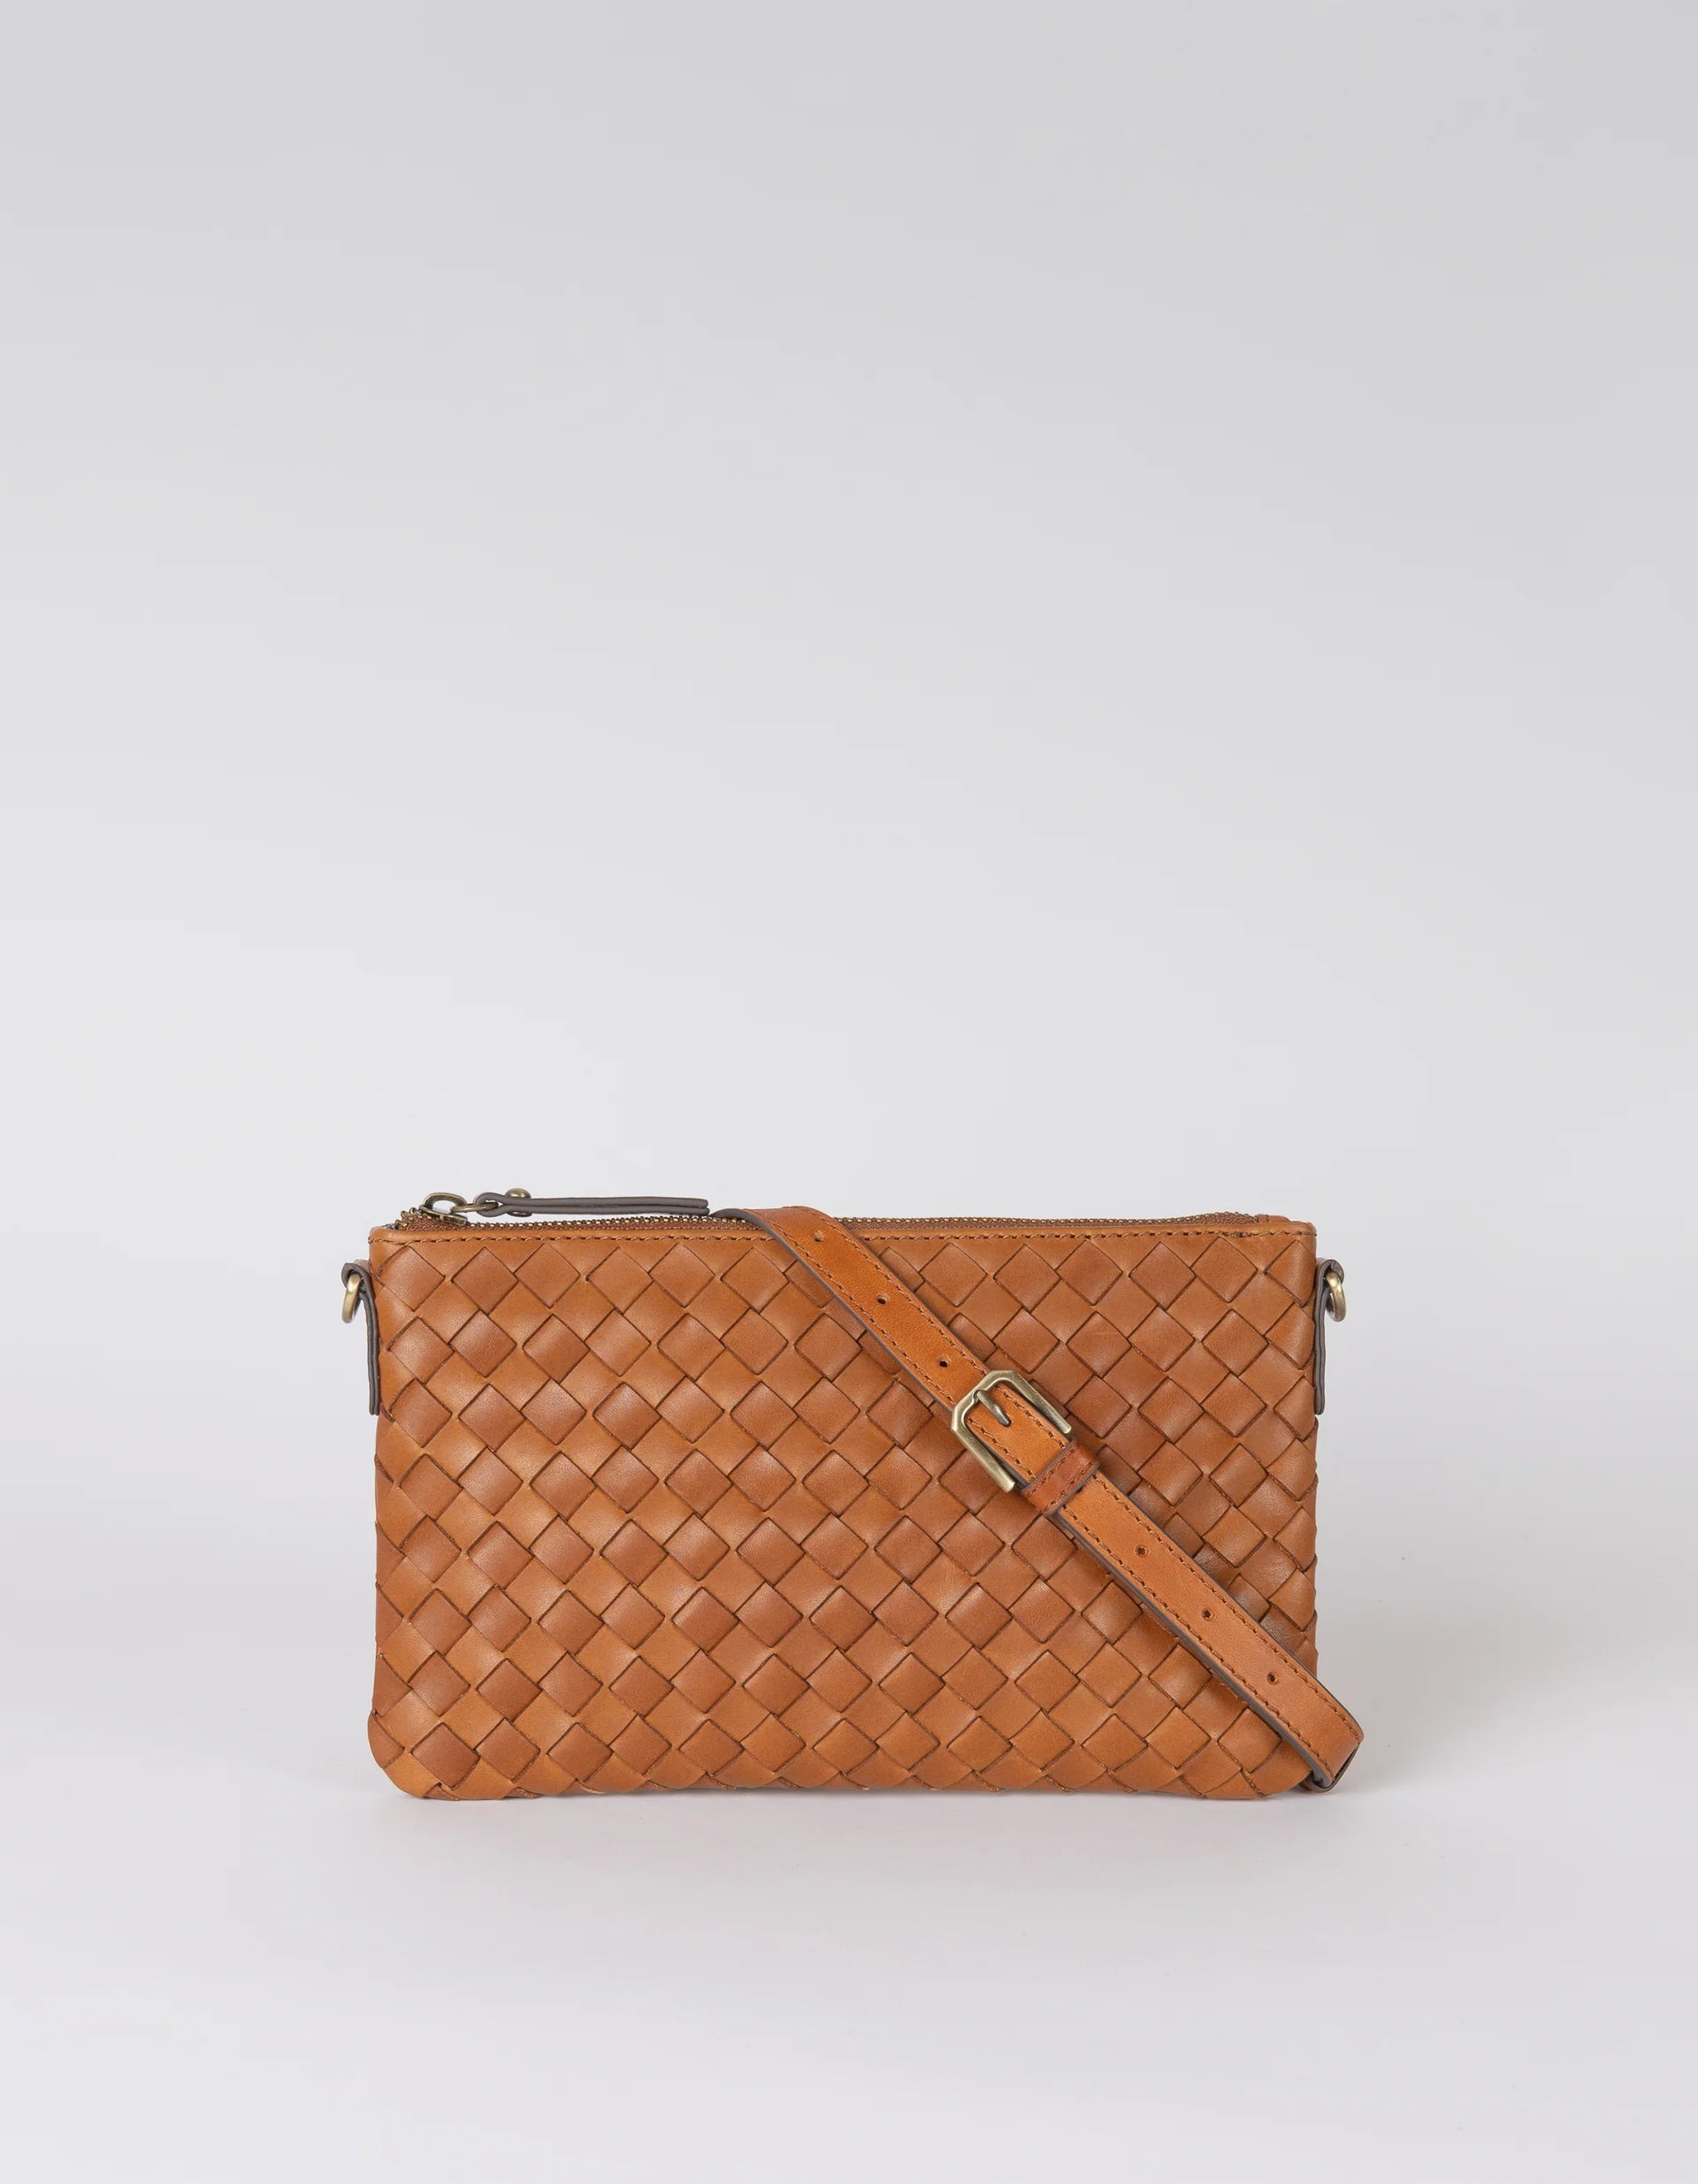 LEXI woven classic leather